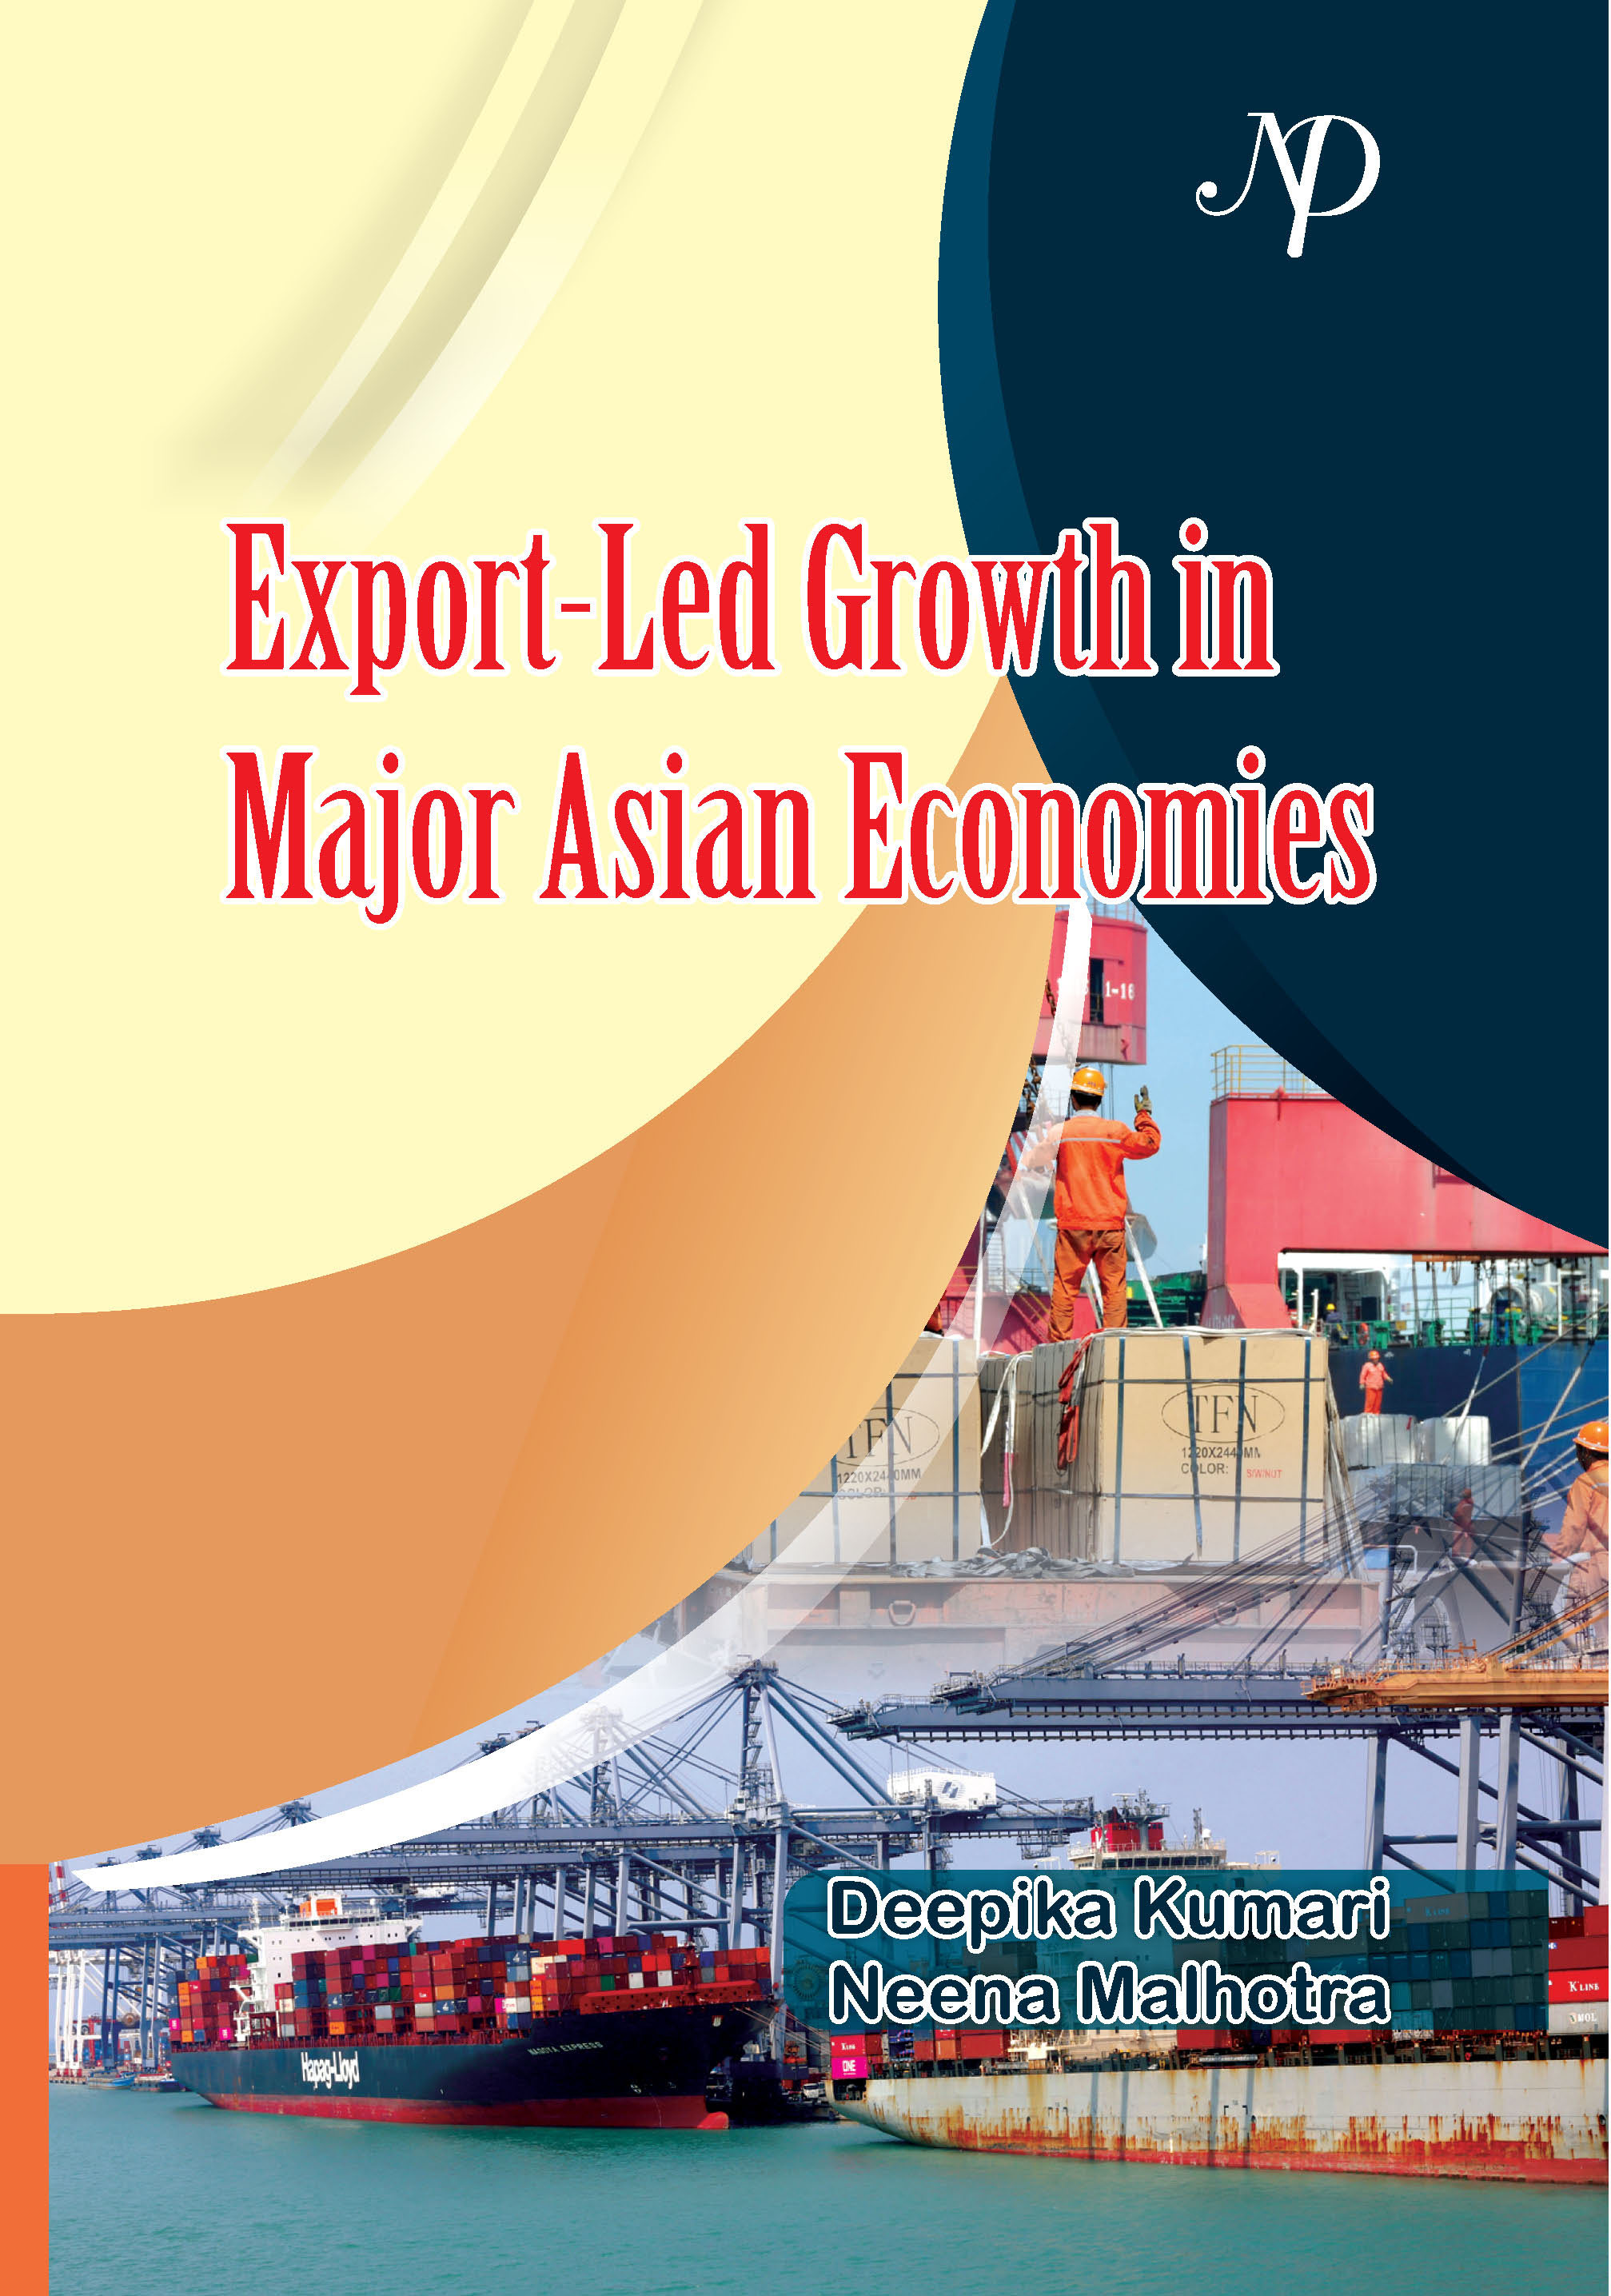 Export-led growth in major asian economies Cover.jpg